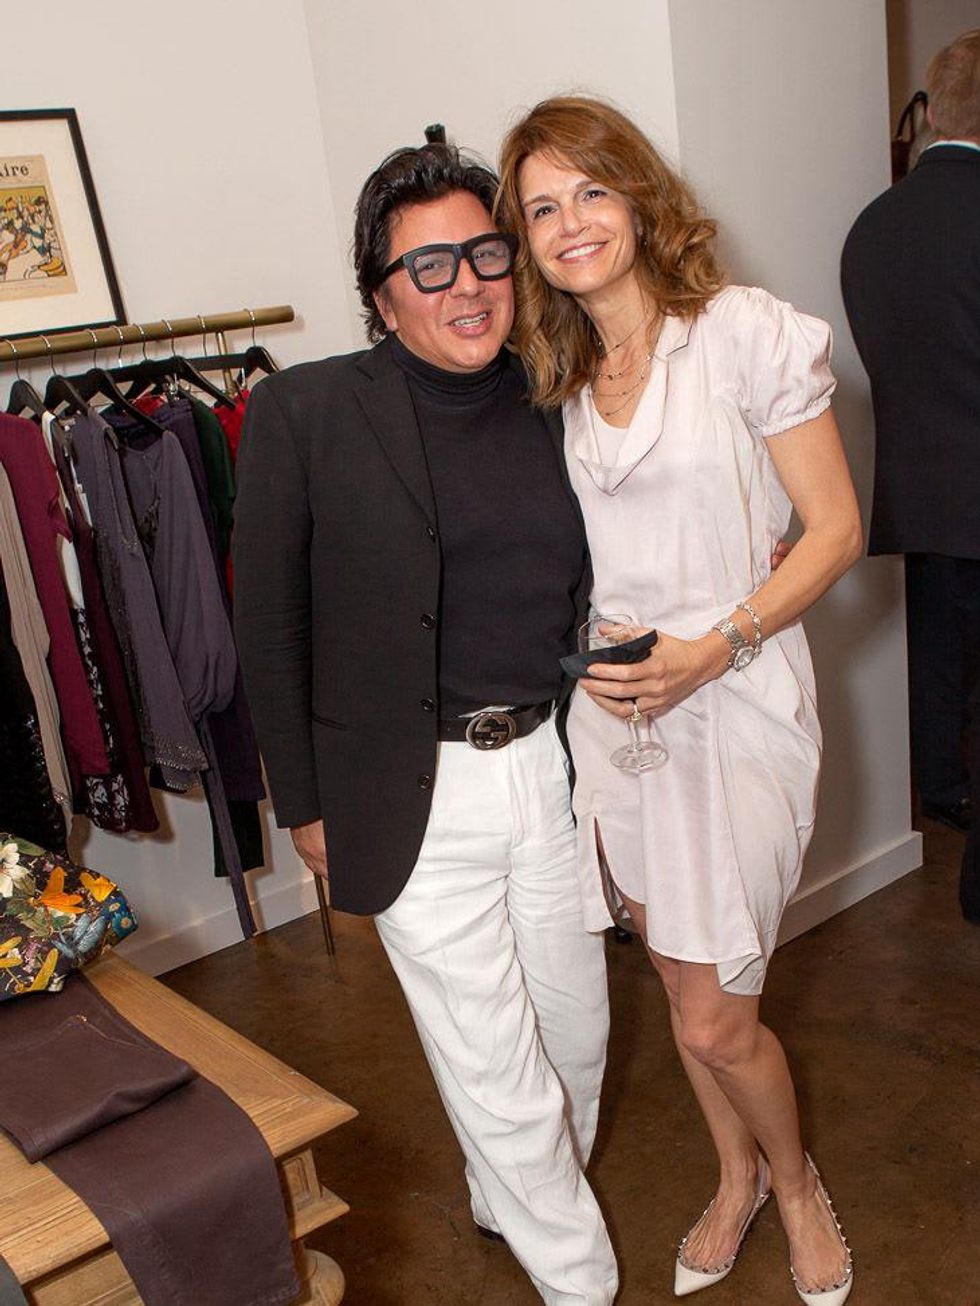 Michael Soliz and Tatiana Szligmann at the Julie Rhodes Fashion & Home Houston opening party October 2013